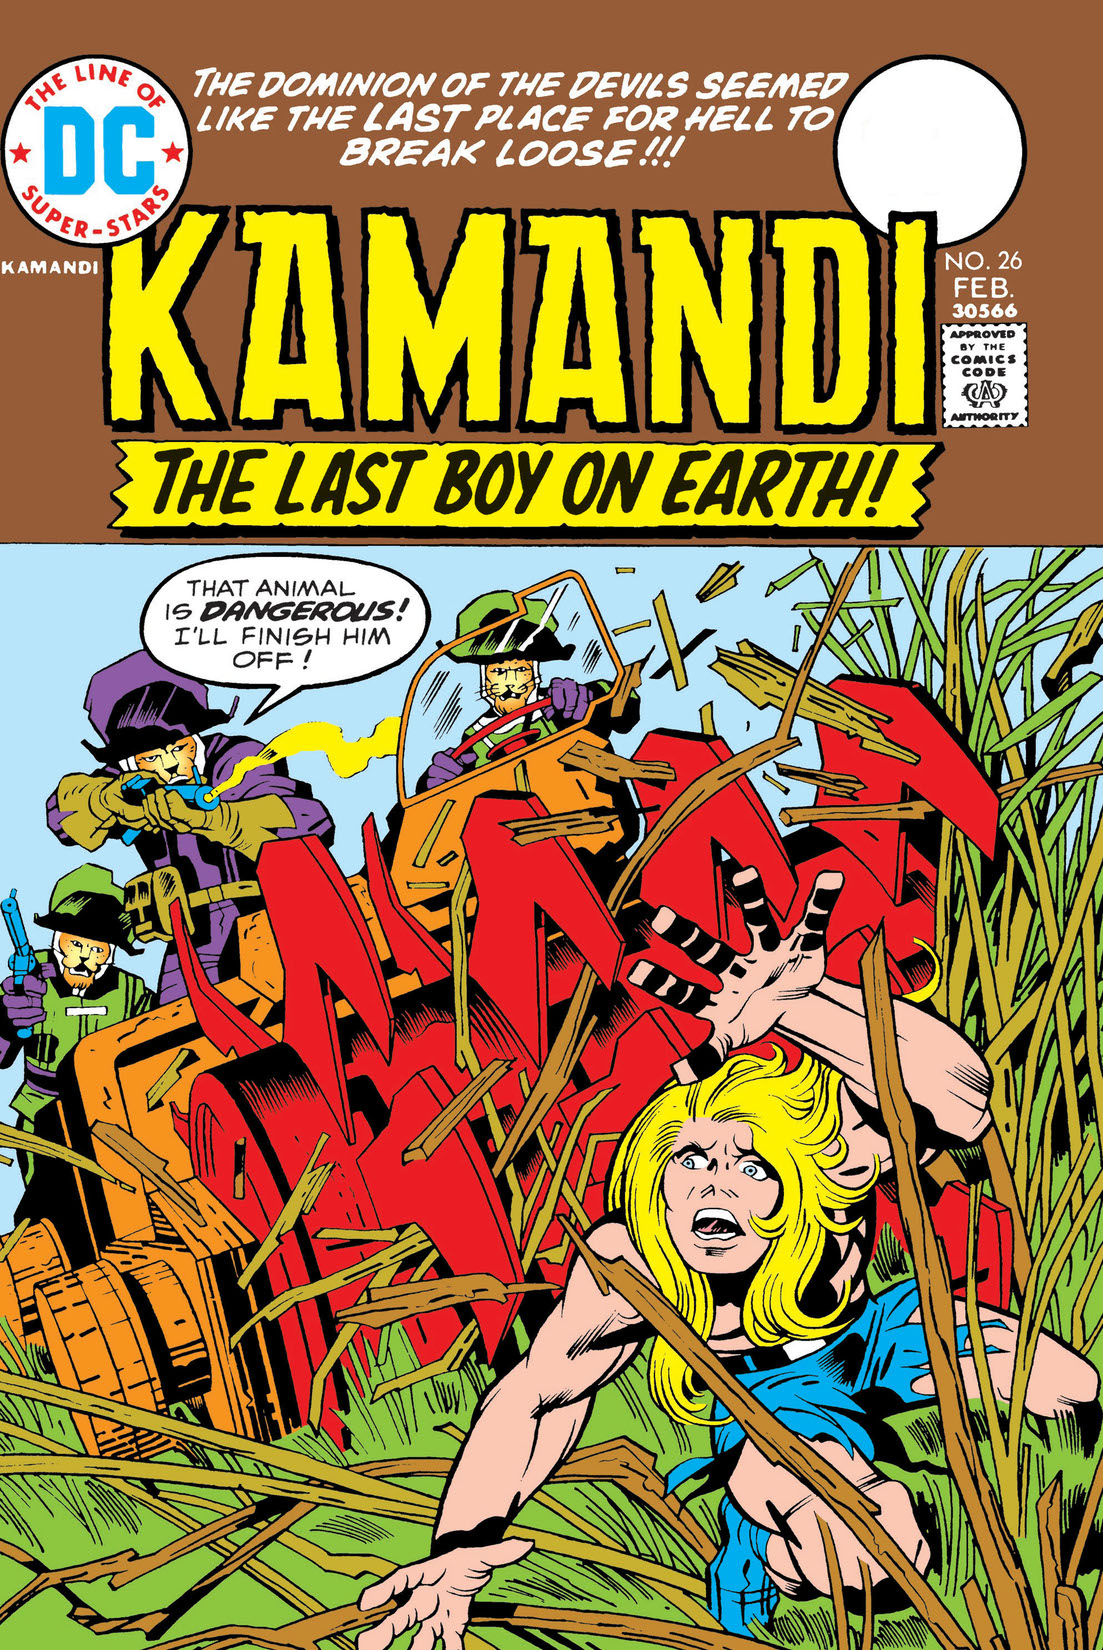 Kamandi: The Last Boy on Earth #26 preview images